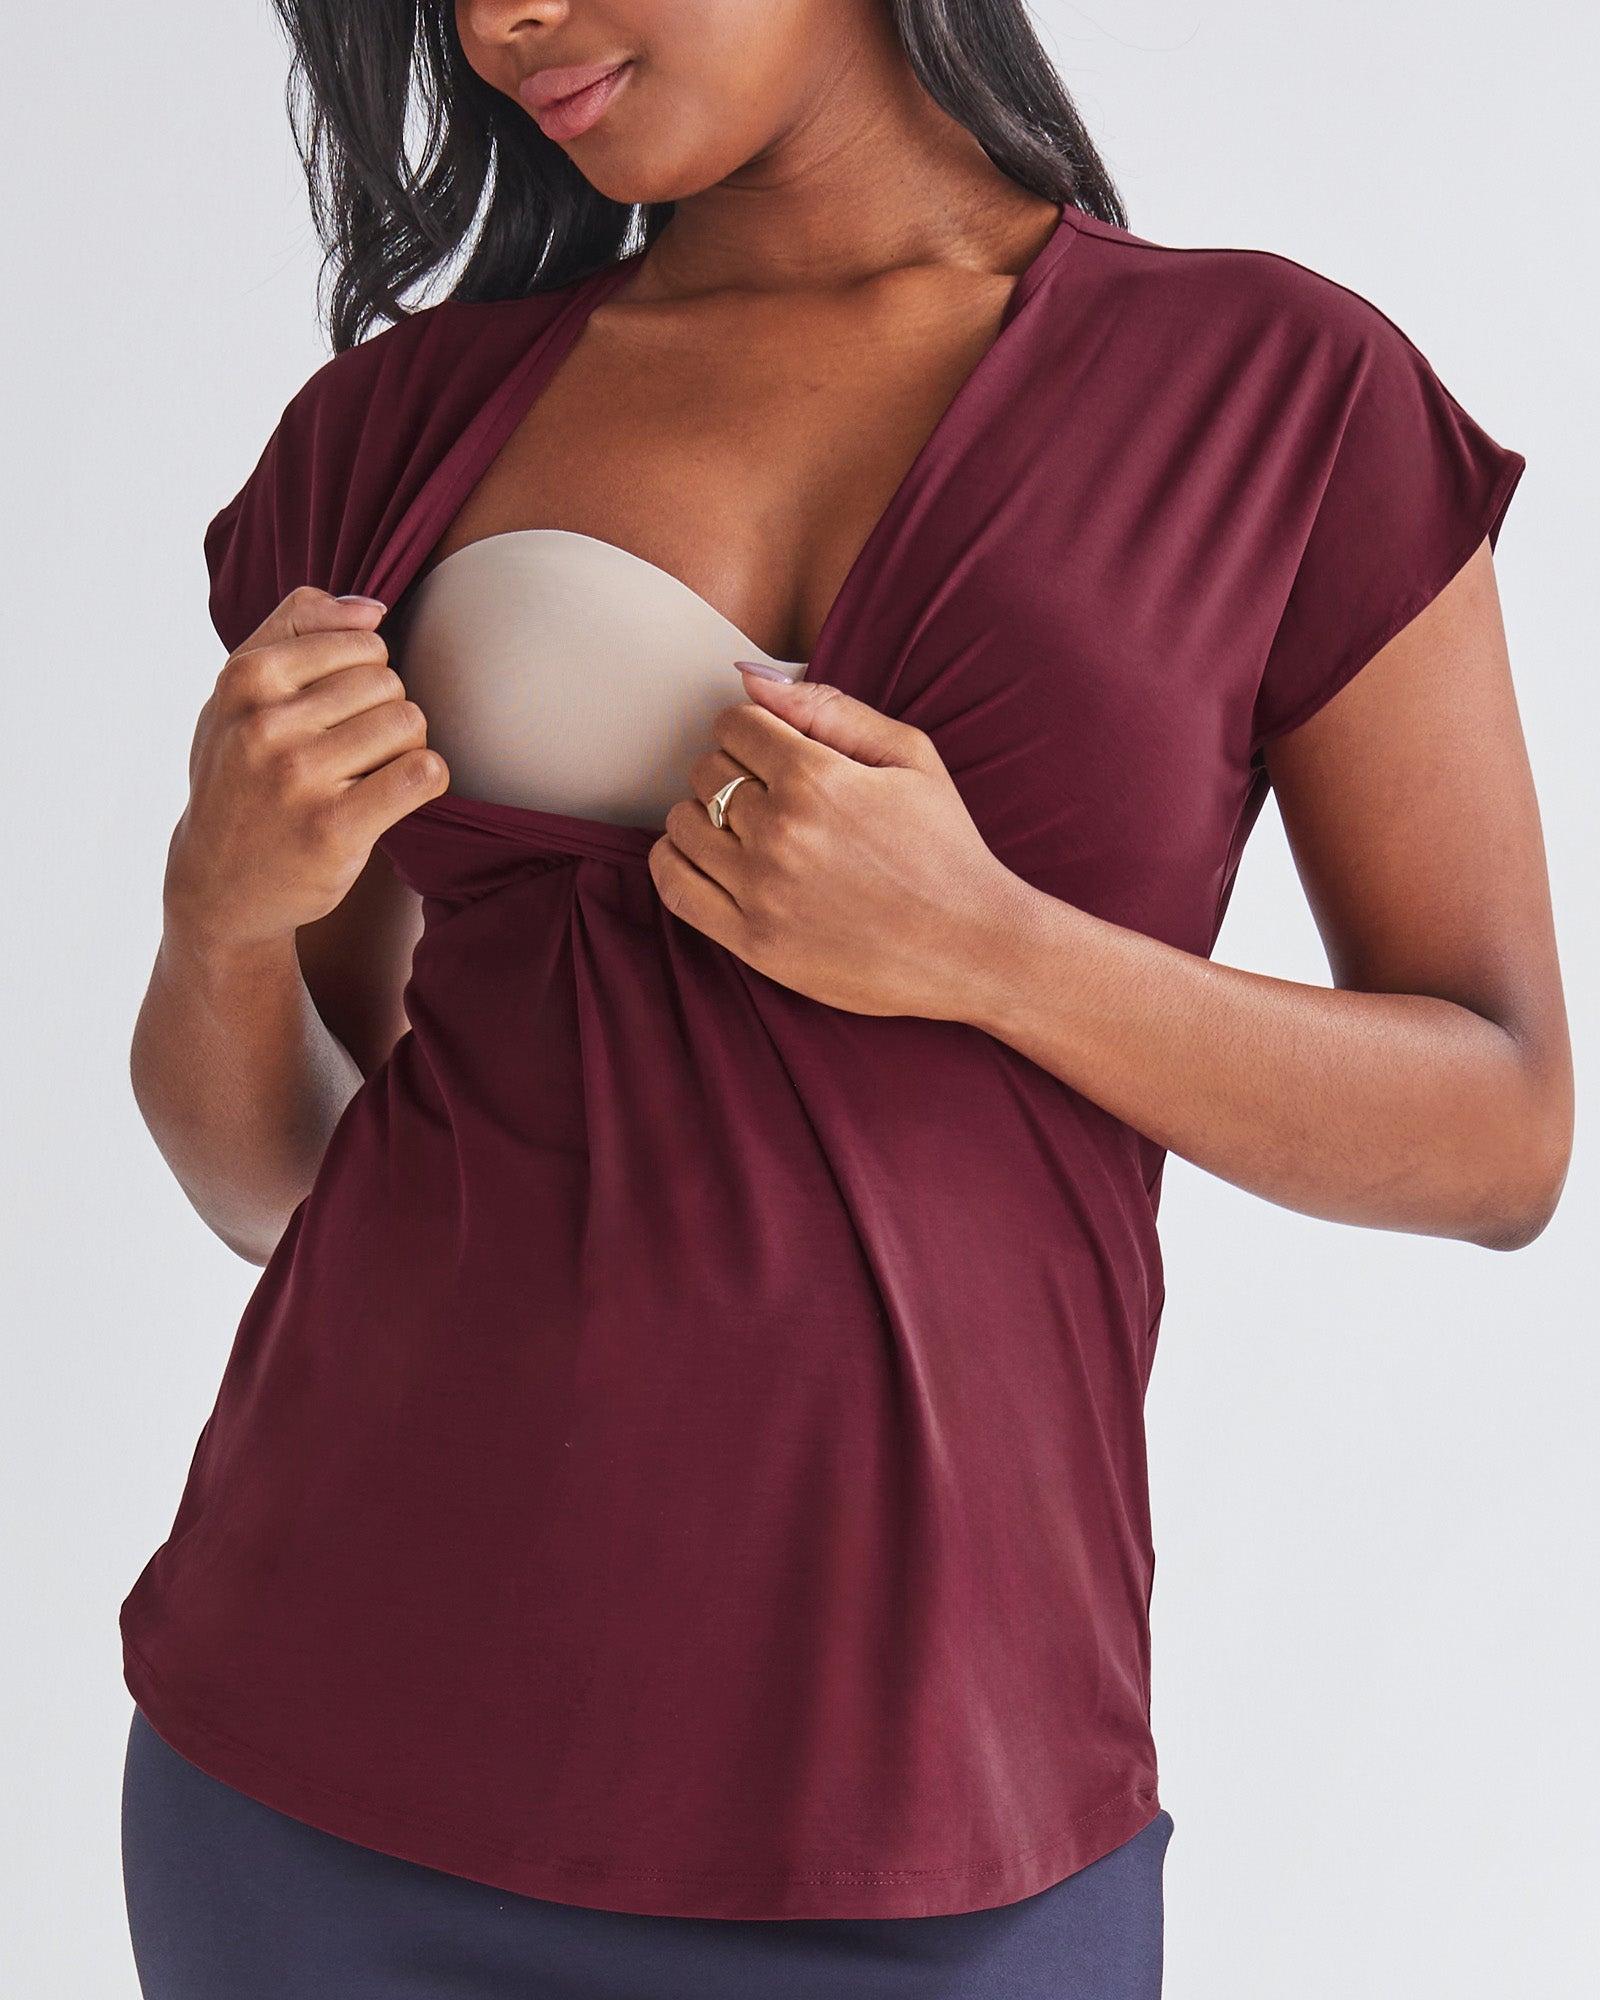 Breastfeeding Friendli - A Pregnannt Woman Wearing Maternity Crossover Burgundy Work Top in from Angel Maternity Showing Easy Access to Breastfeeding.